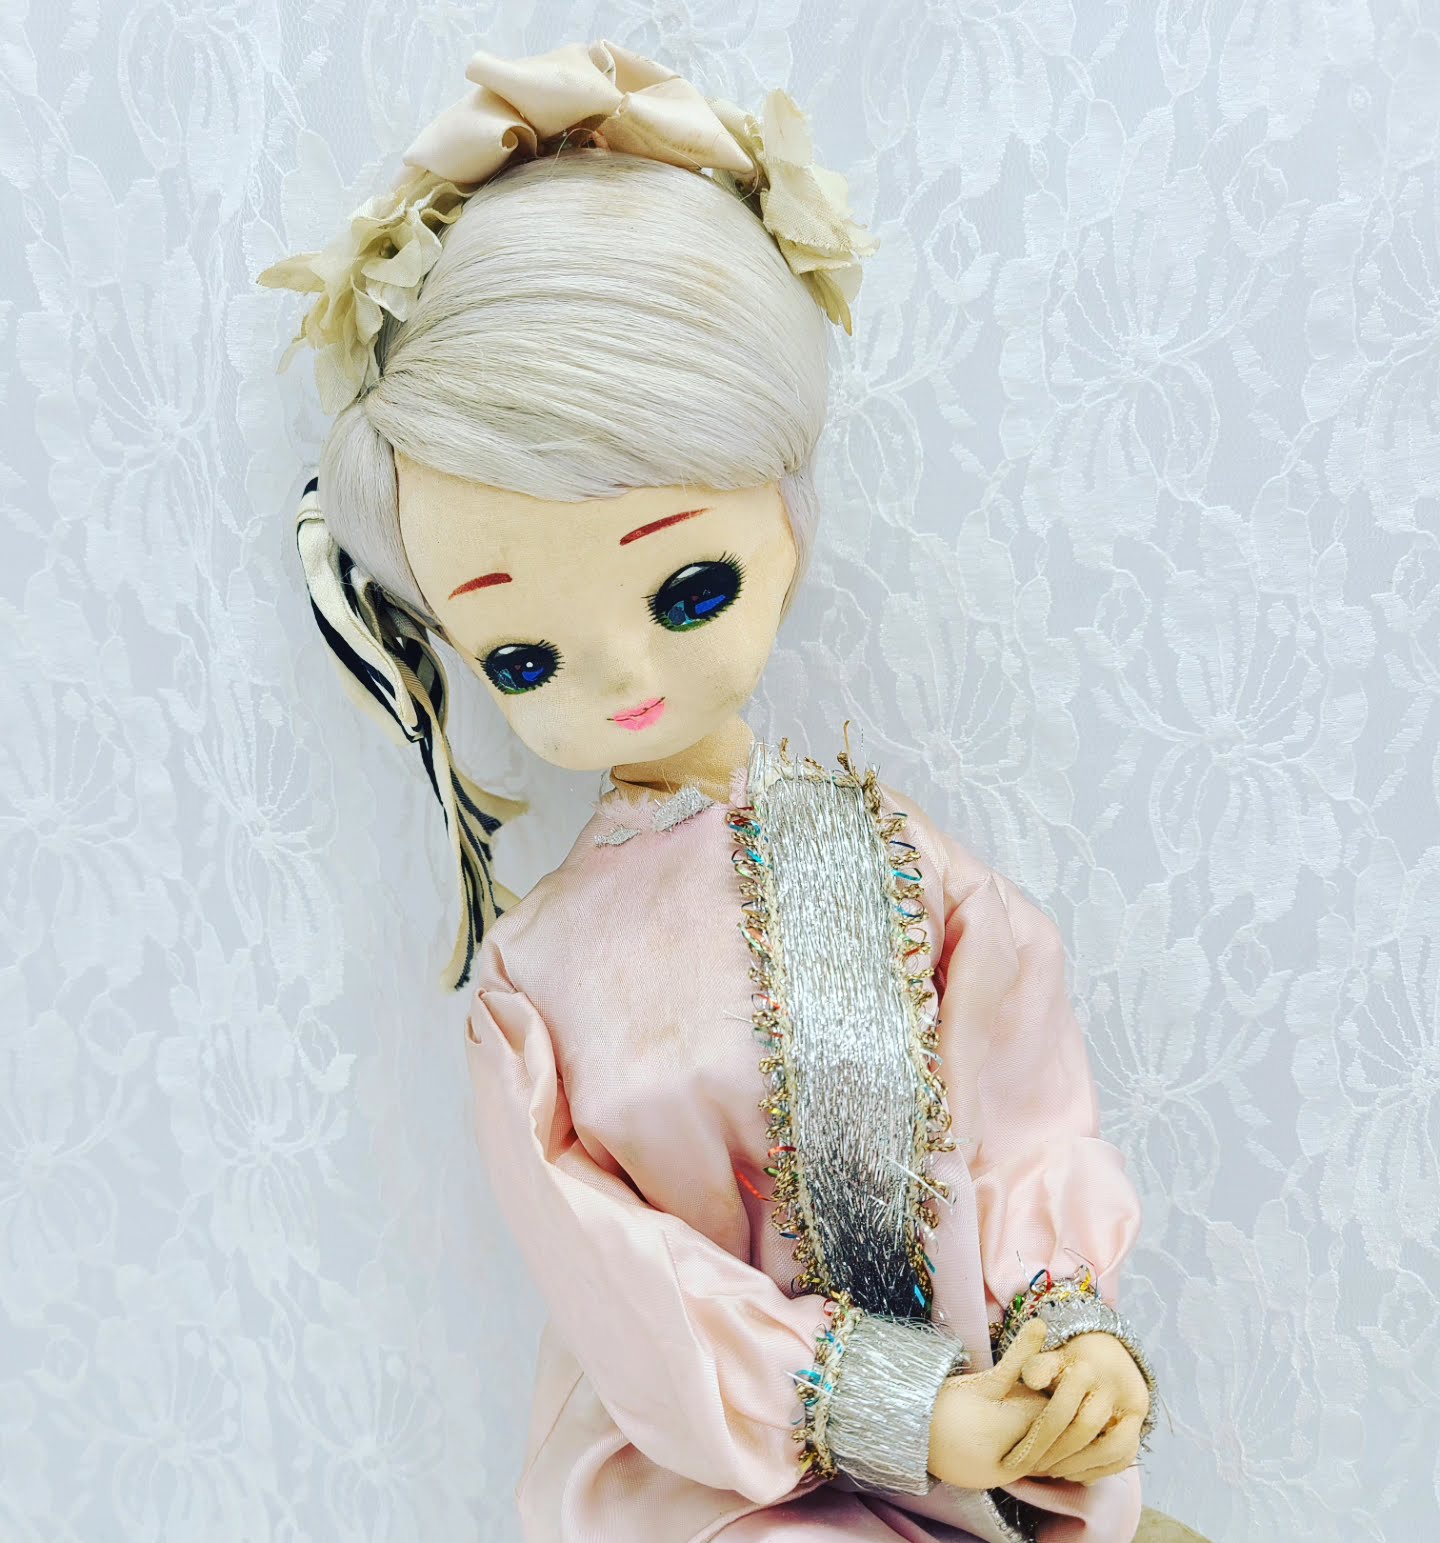 Veronika Haunted Doll ~17" Stockinette 1960s Doll ~ Paranormal ~ Very Active ~ Posh ~ Judgy ~ Wise, in Certain Ways